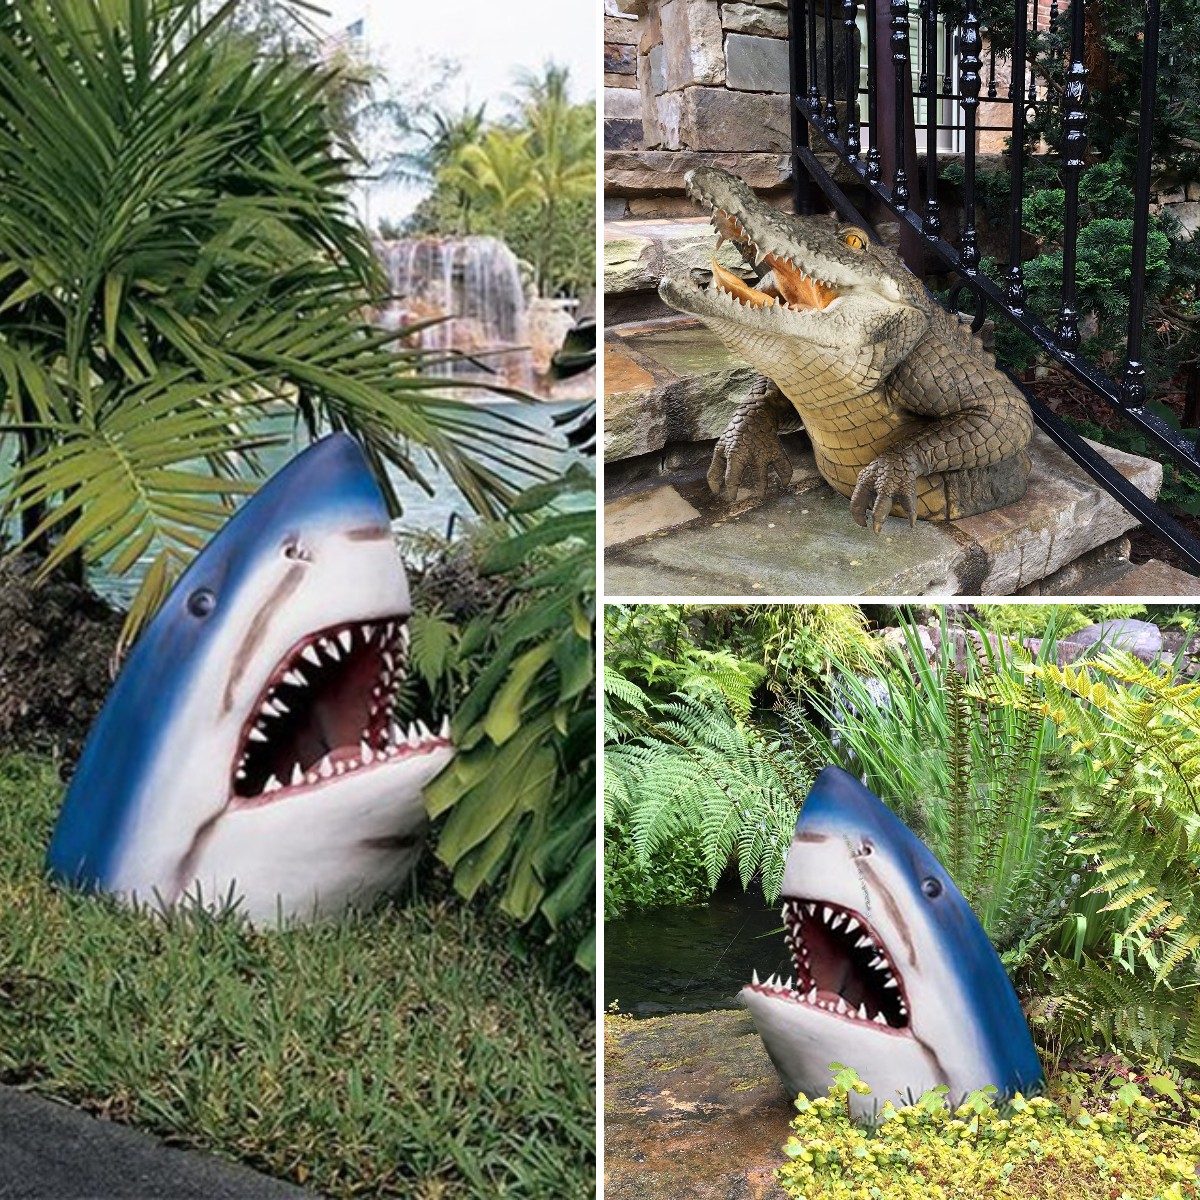 🔥Limited Time Sale 48% OFF🎉Garden Swamp Gator Statue-Buy 2 Get Free Shipping